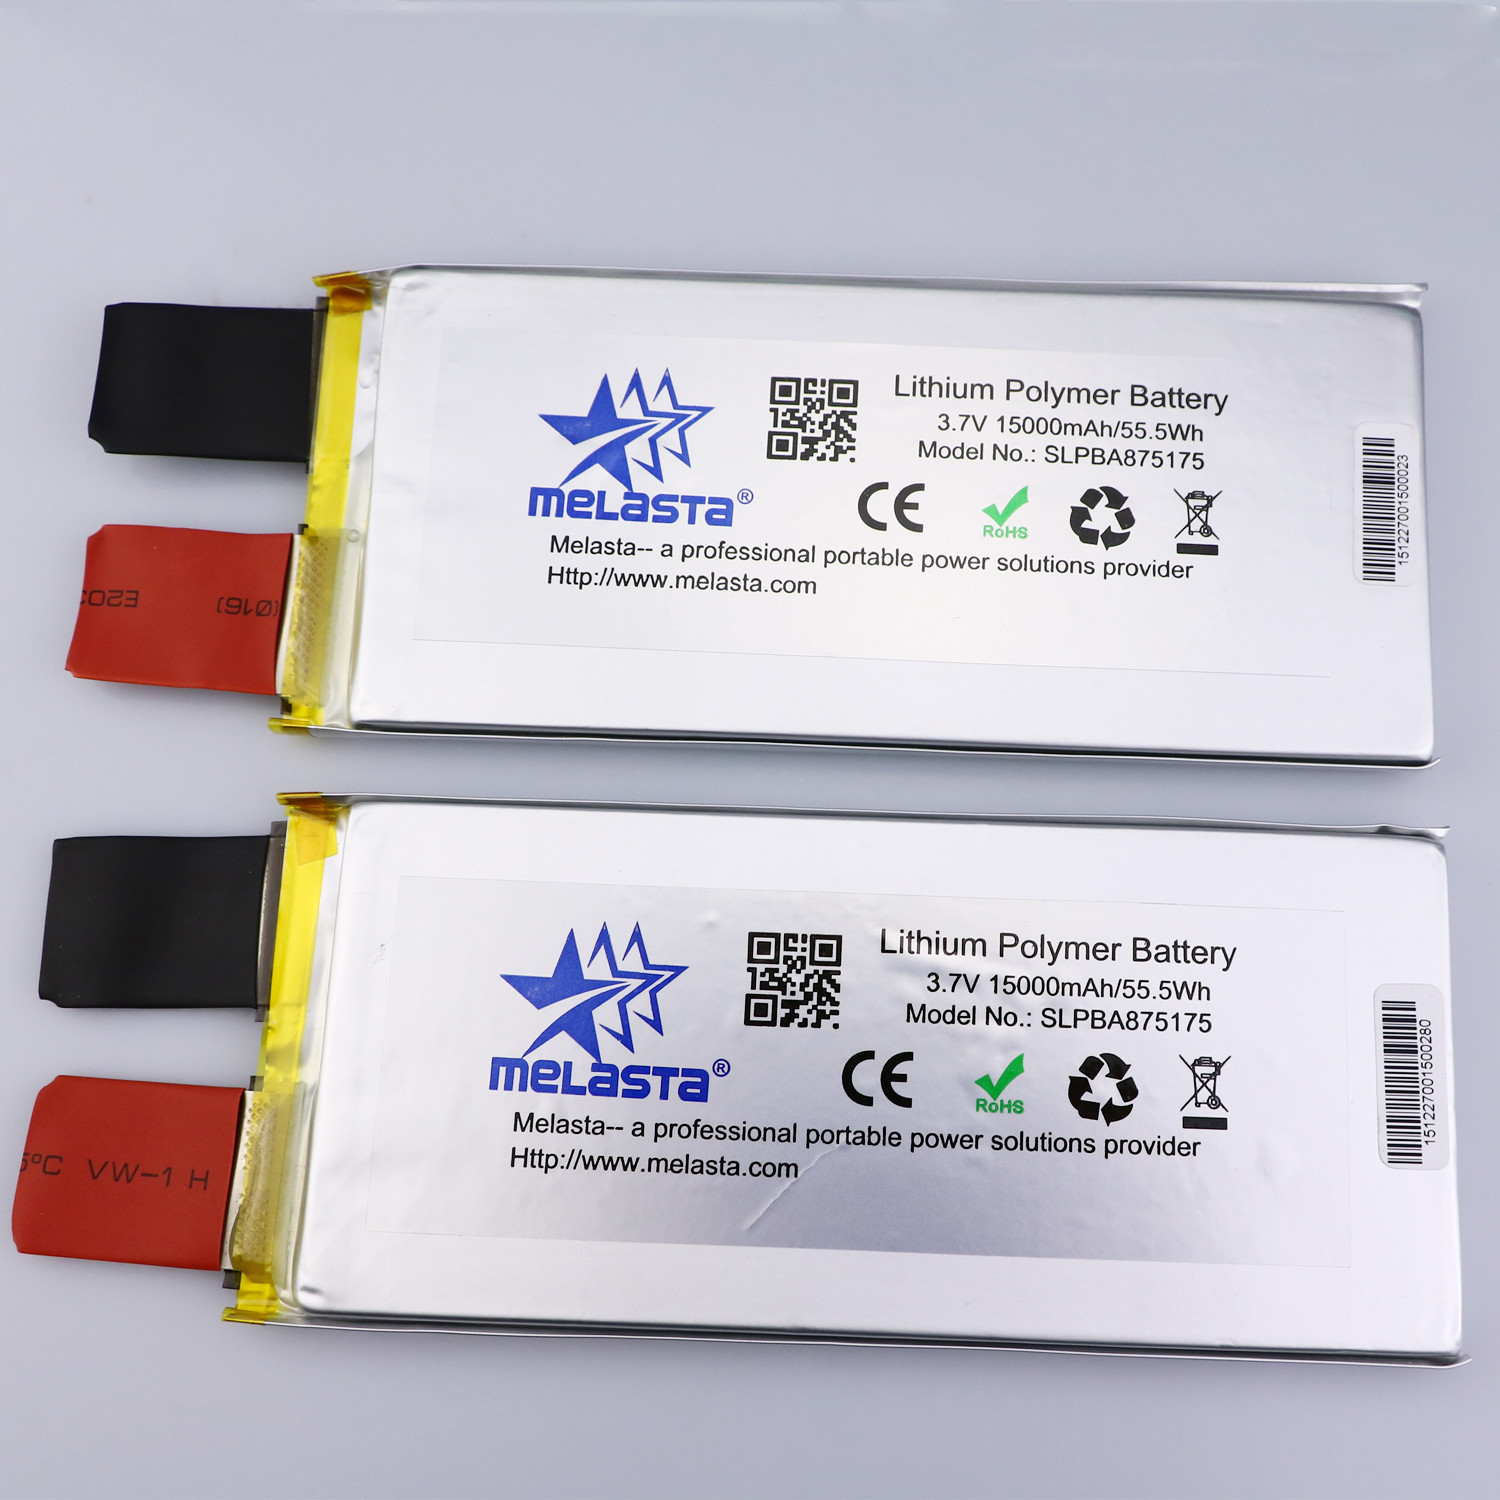 3.7V 15000mAh (55.5Wh) 10C super high capacity lithium ion polymer battery